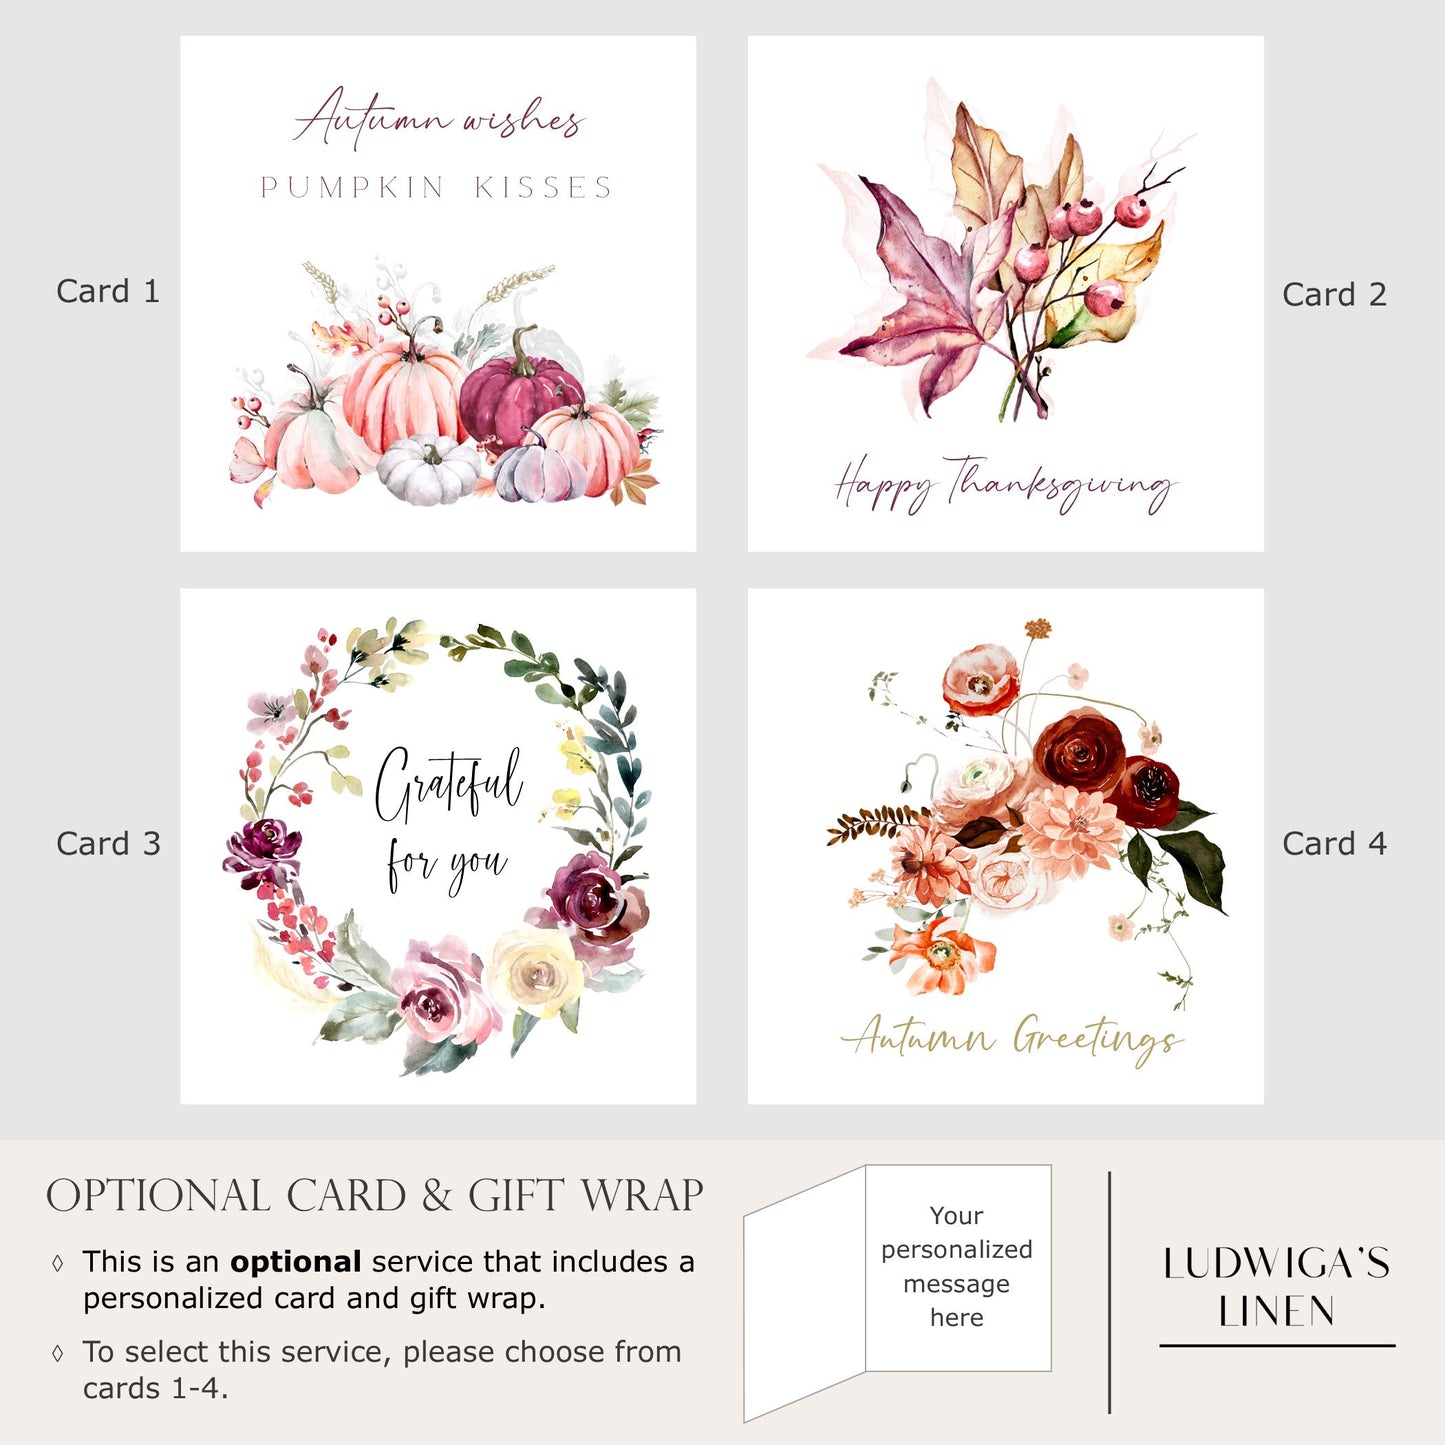 Optional gift box and selection of four greeting cards, each of which may be personalized